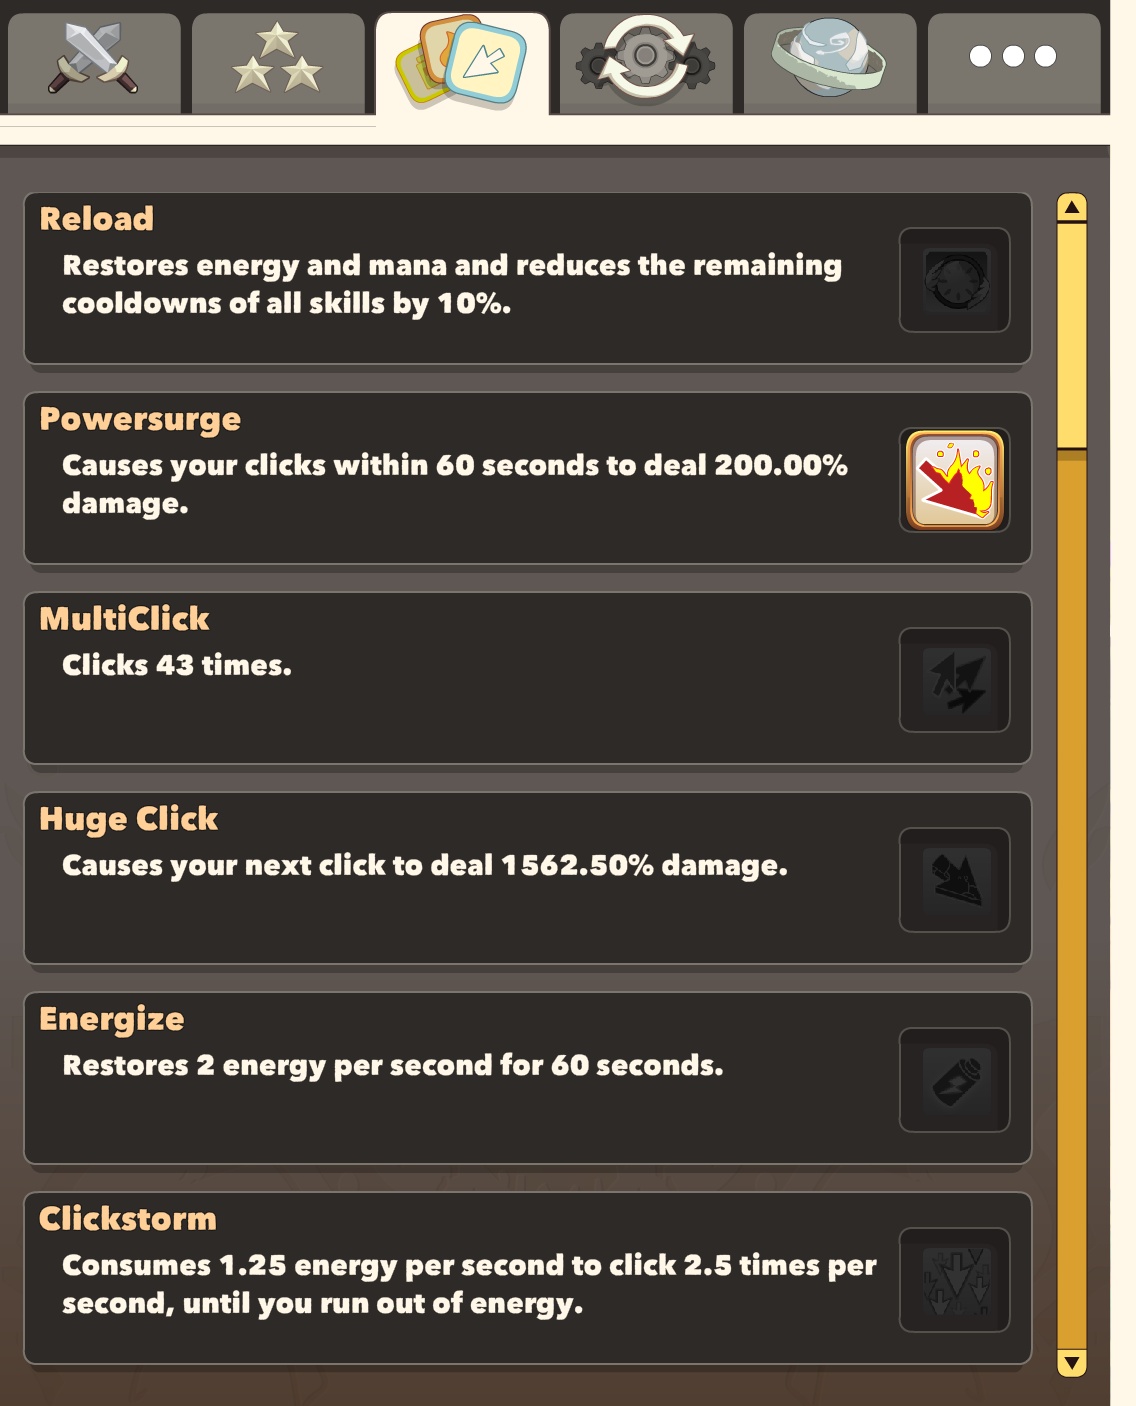 clicker heroes is gilded guide